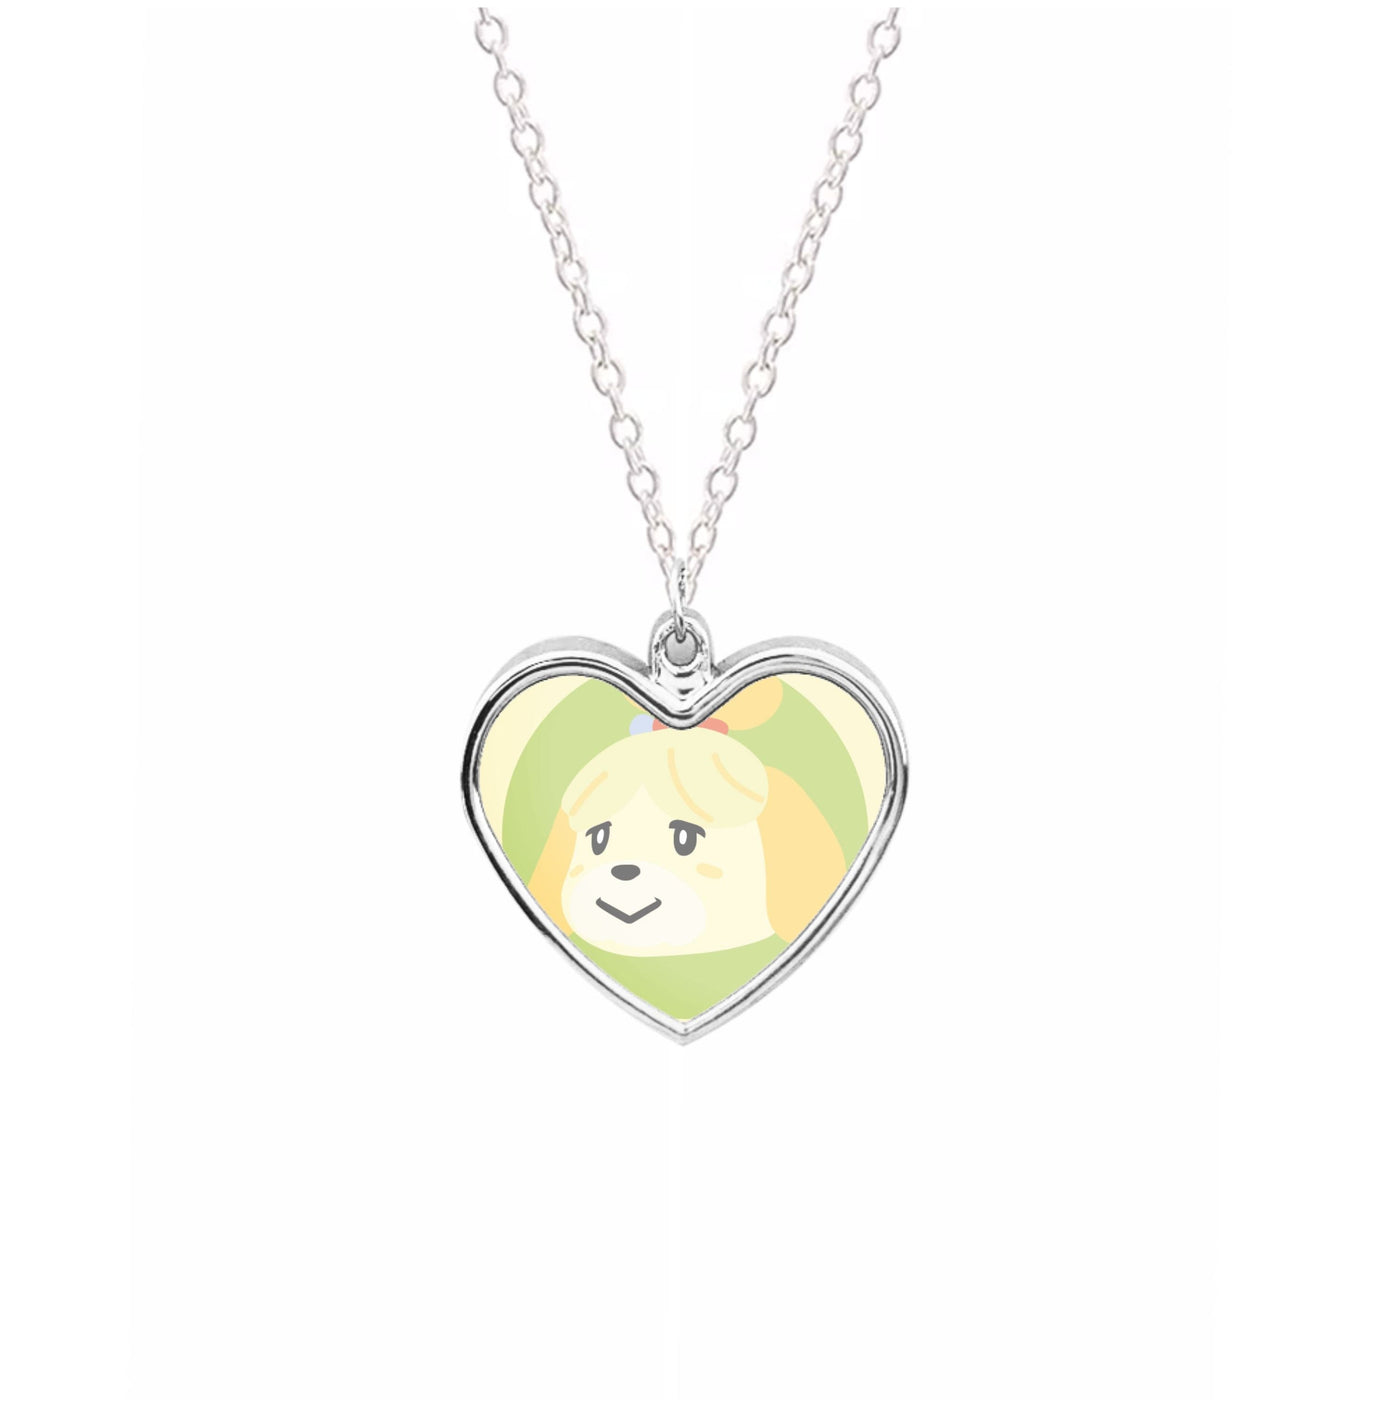 Isabelle - Animal Crossing Necklace